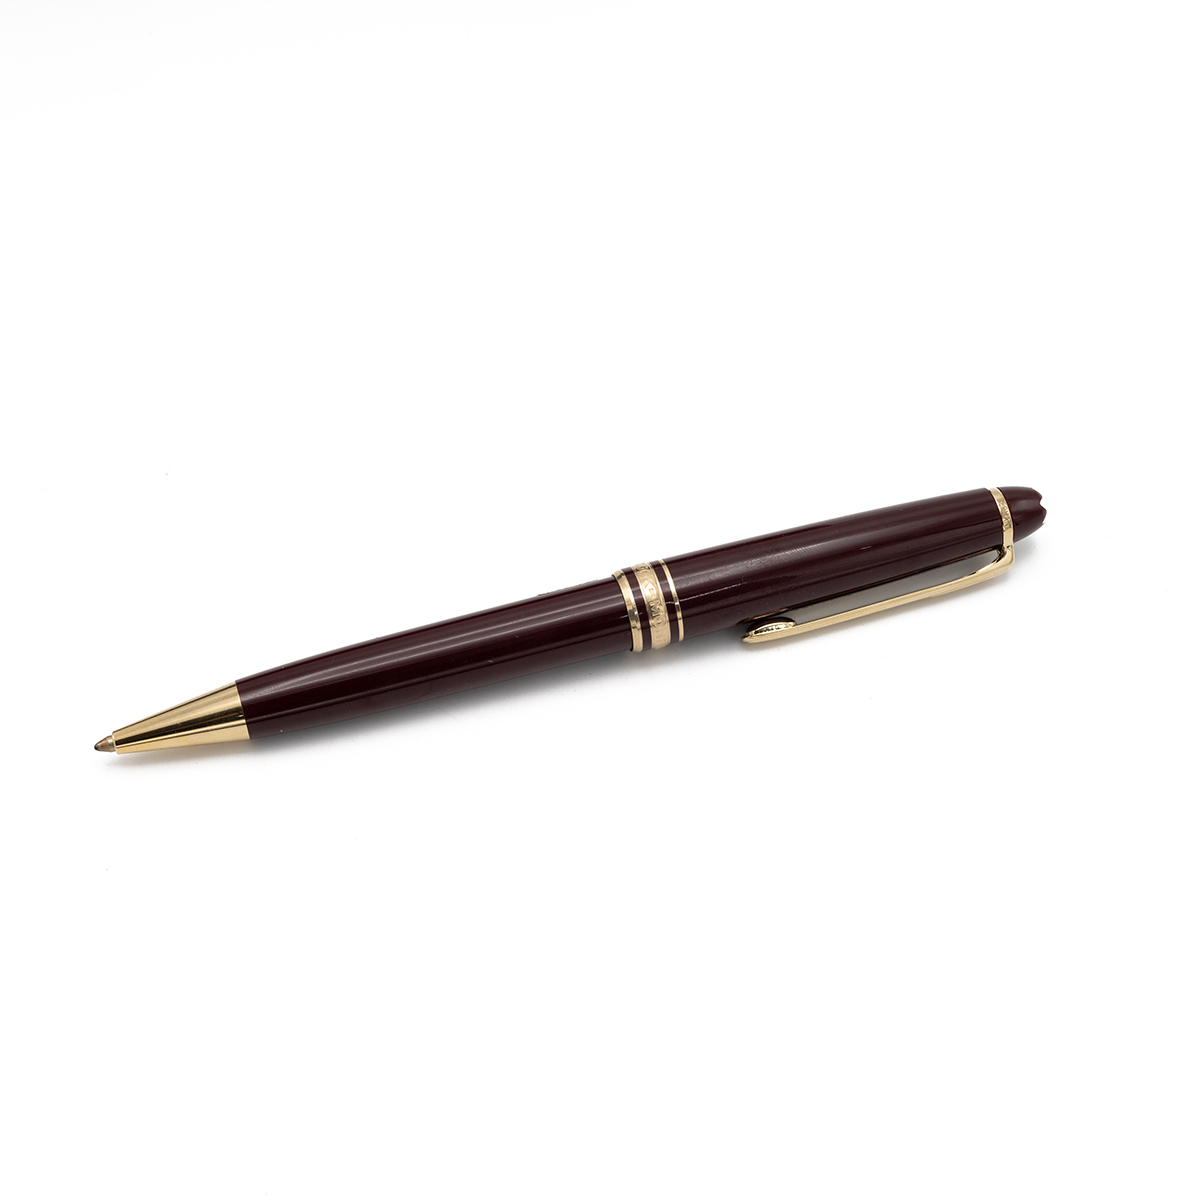 Mont Blan Meisterstuck ball point pen in Burgundy, serial number 1C250280, in a clam shell presen... - Image 2 of 5